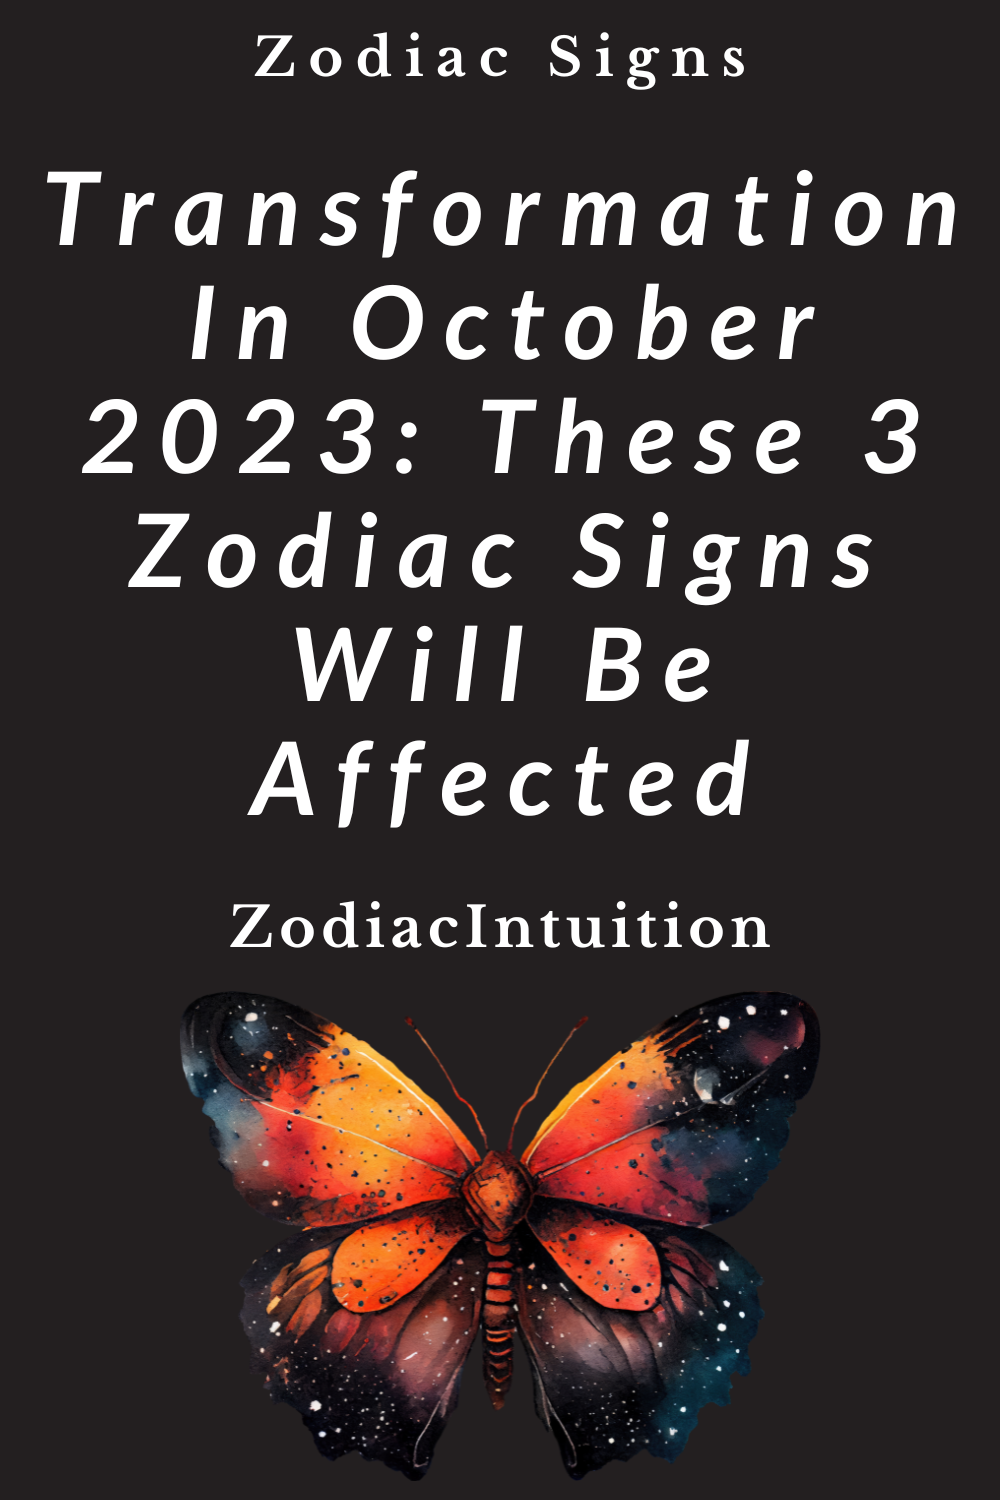 Transformation In October 2023: These 3 Zodiac Signs Will Be Affected